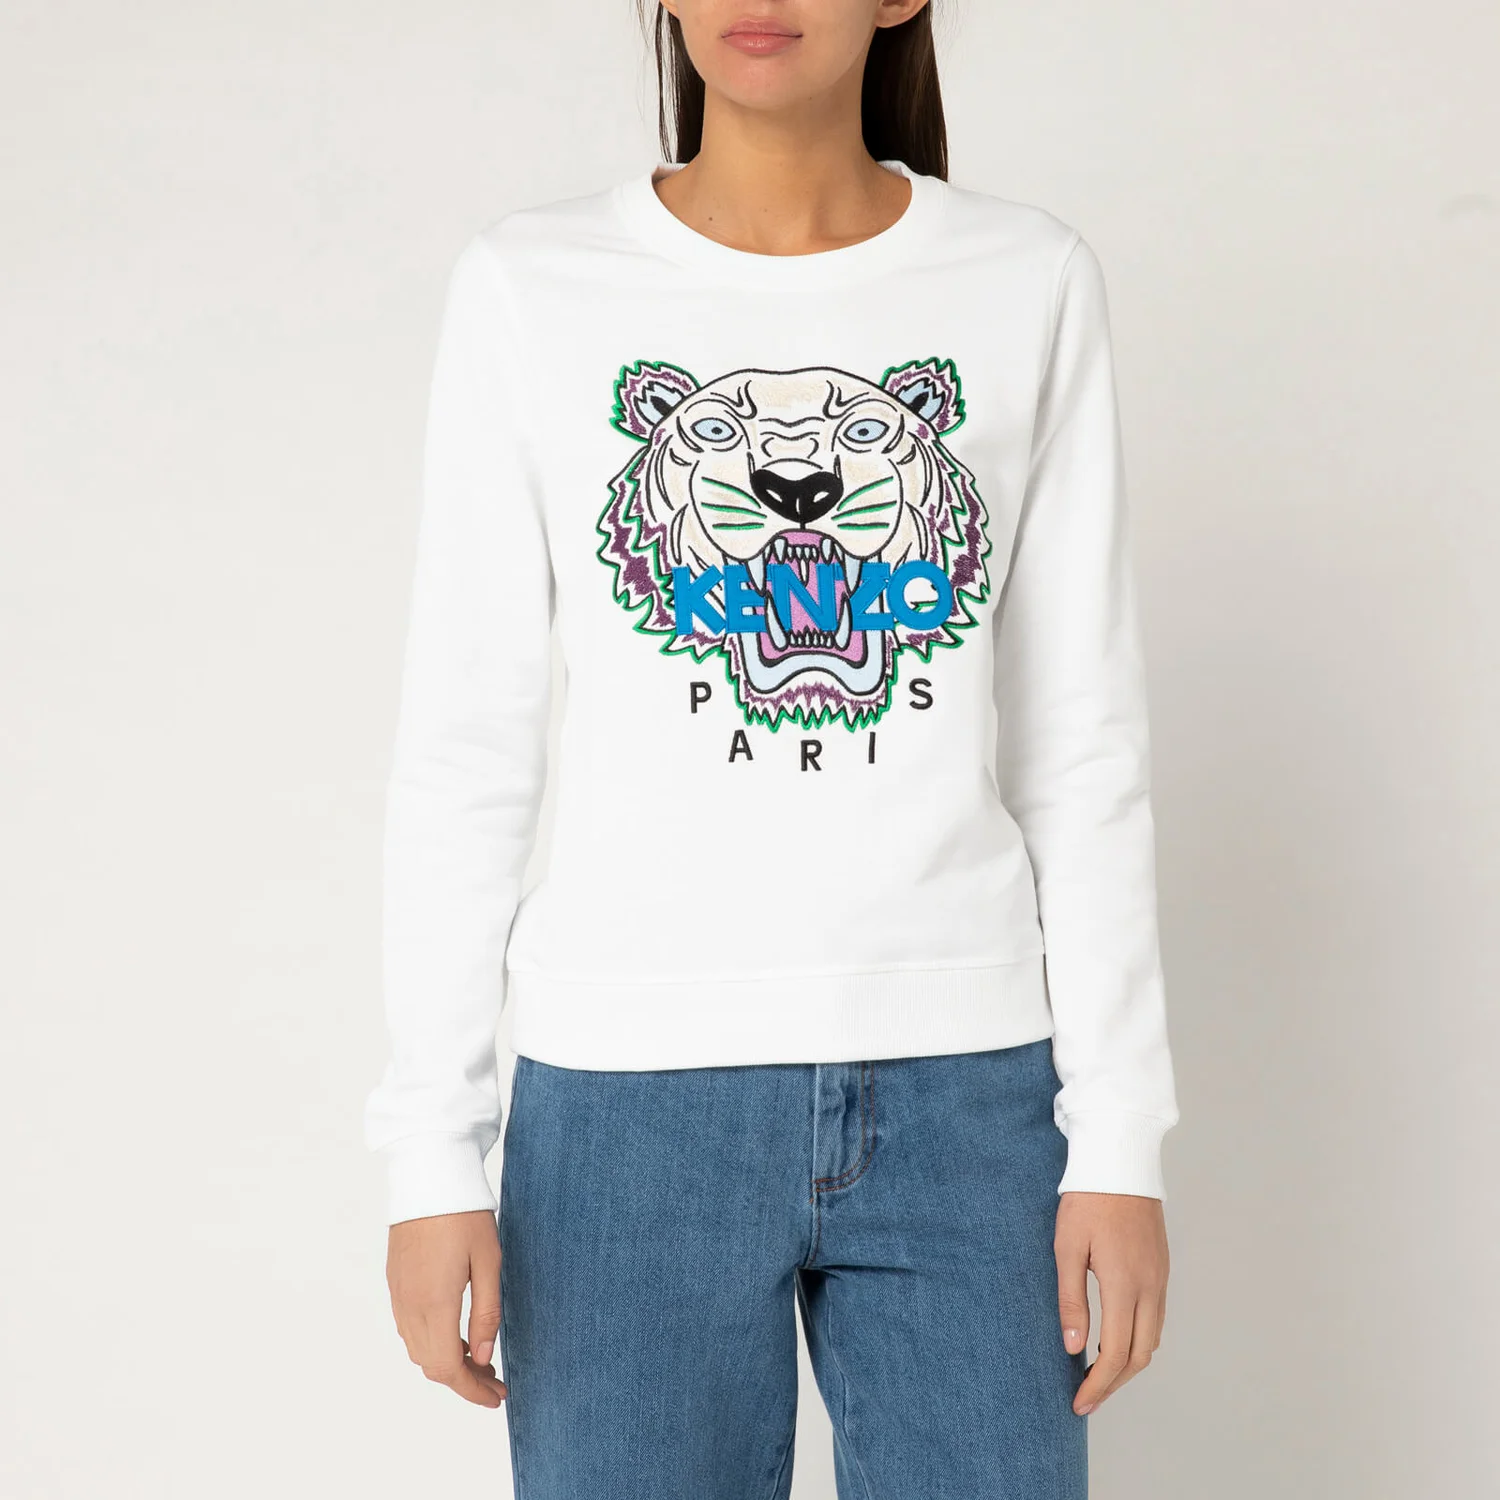 KENZO PARIS WOMEN EMBROIDERED TIGER SWEATSHIRT/PULLOVER-SIZE M/US 6-GENTLY  USED